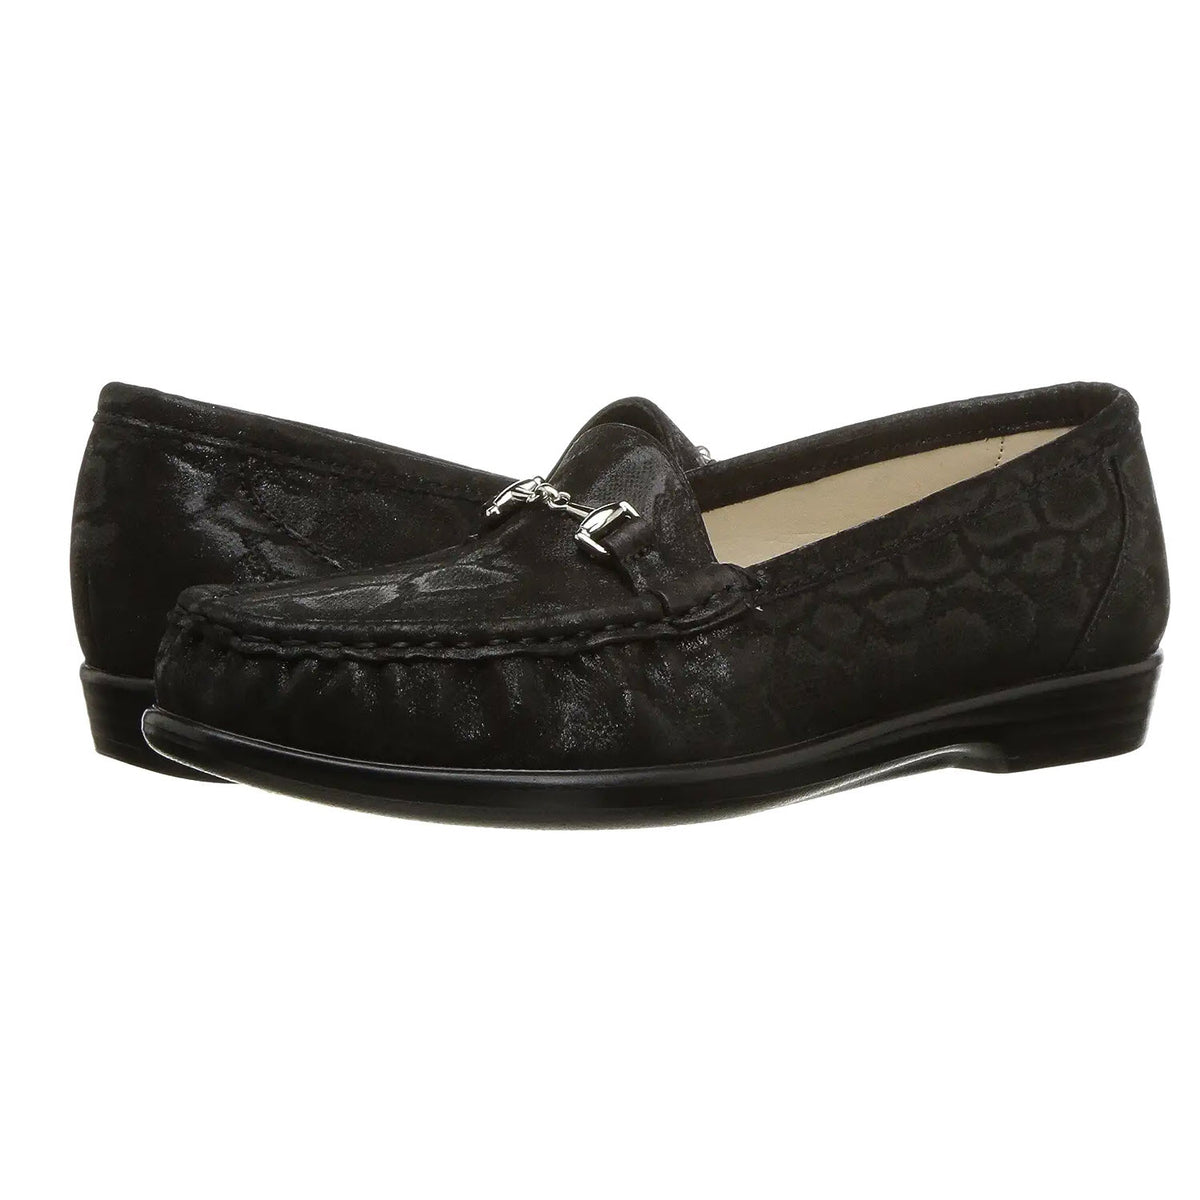 A pair of black leather SAS Metro Nero Snake slip-on loafers with a metallic ornament on the front, displayed against a white background.